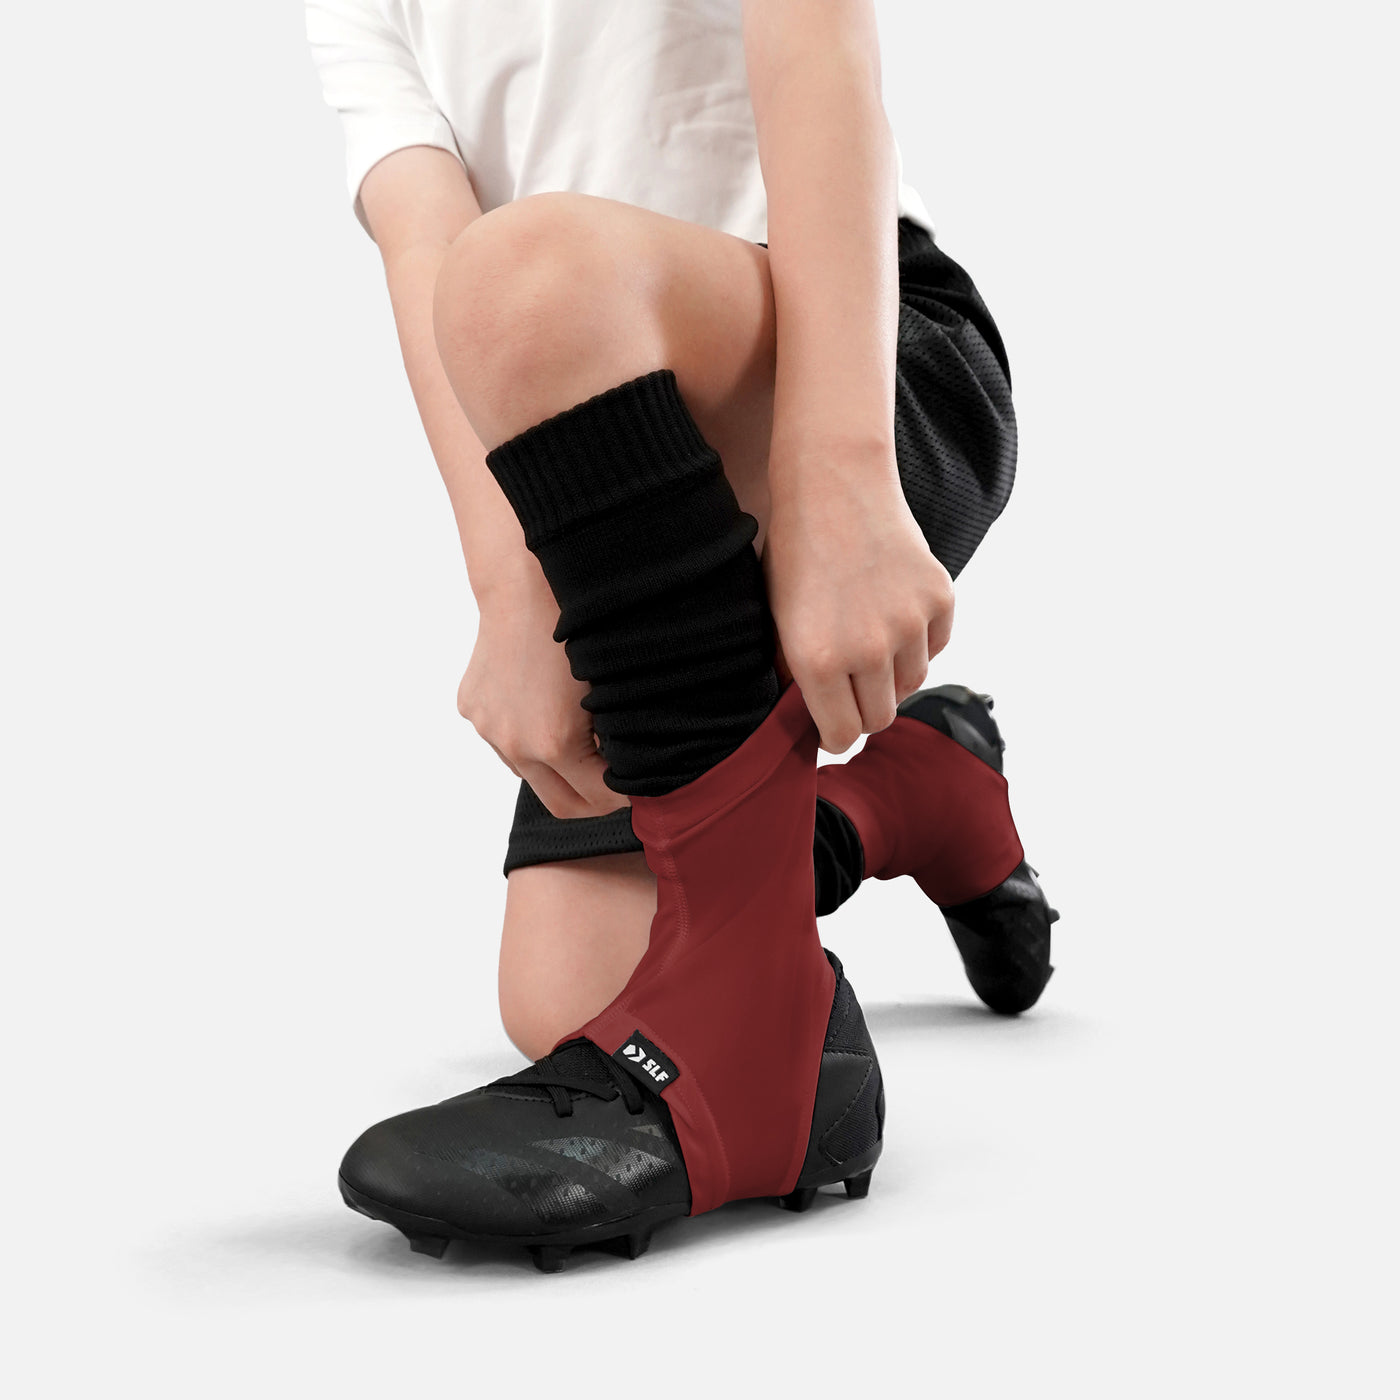 Hue Maroon Kids Spats / Cleat Covers